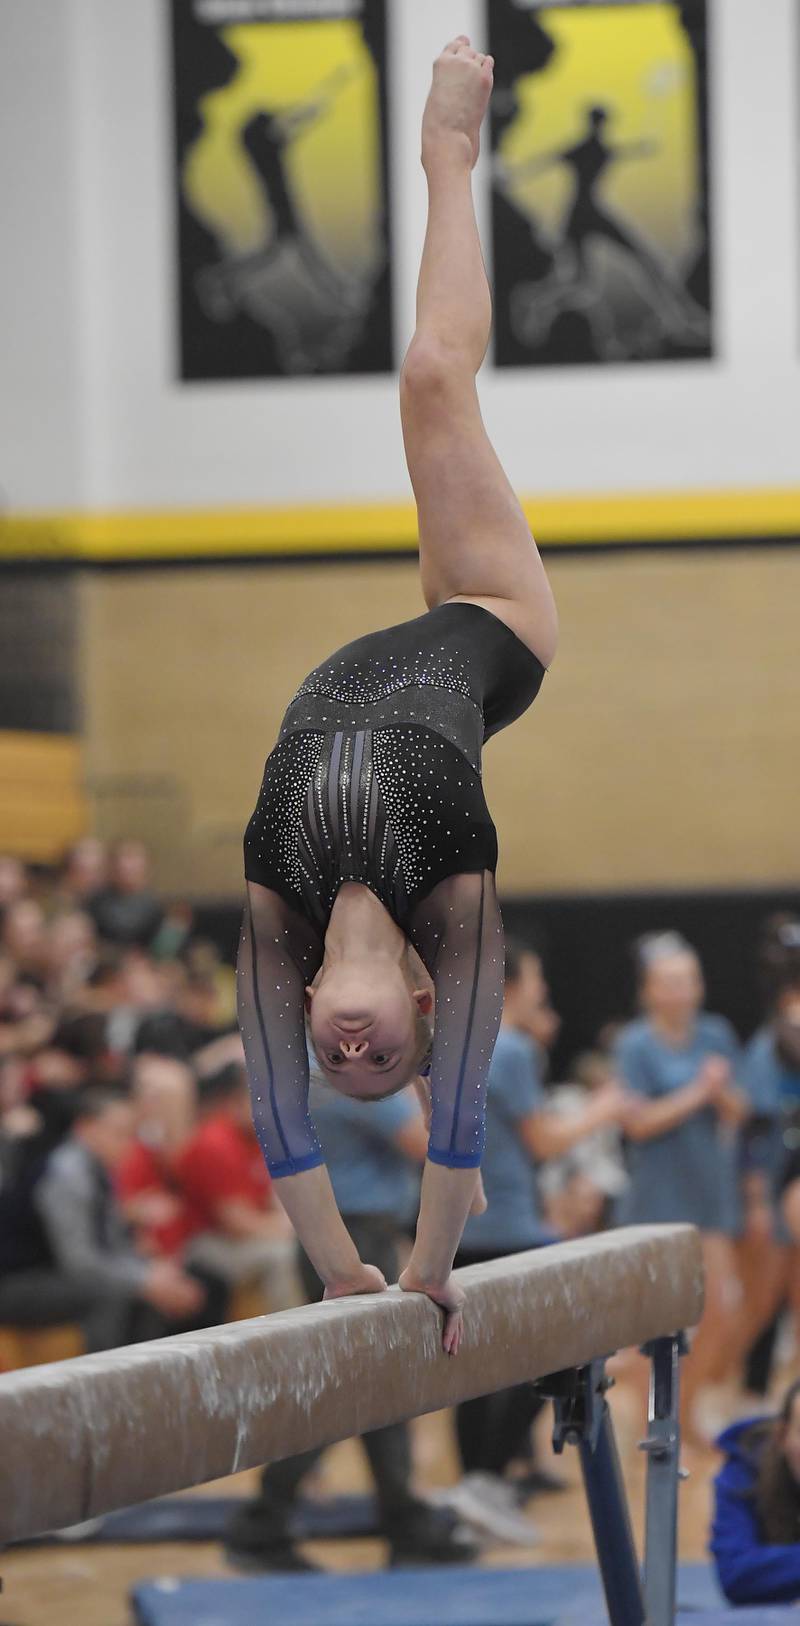 Geneva's Brooke Lussnig on the balance beam at the Hinsdale South girls gymnastics sectional meet in Darien on Tuesday, February 7, 2023.